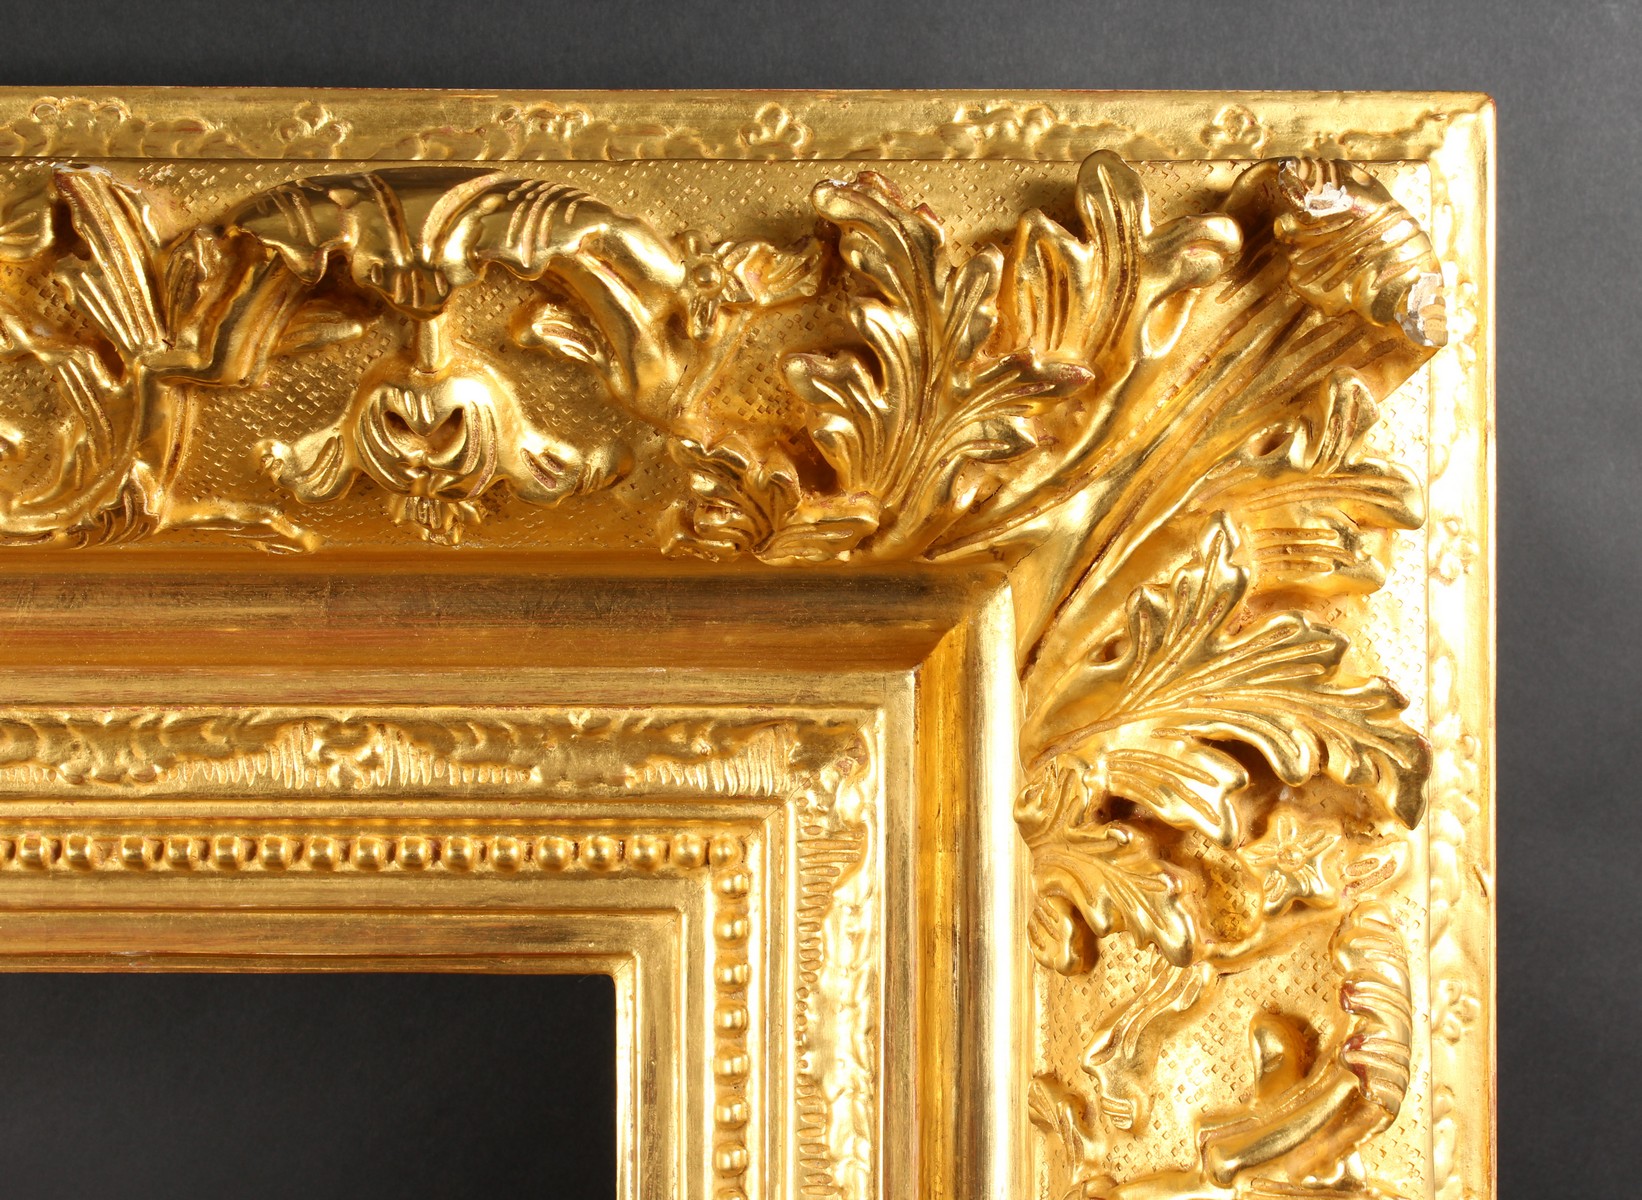 A 19th Century French Gilt Composition Frame with Scrolled Corners. 22" x 18" - 56cm x 45.75cm. (